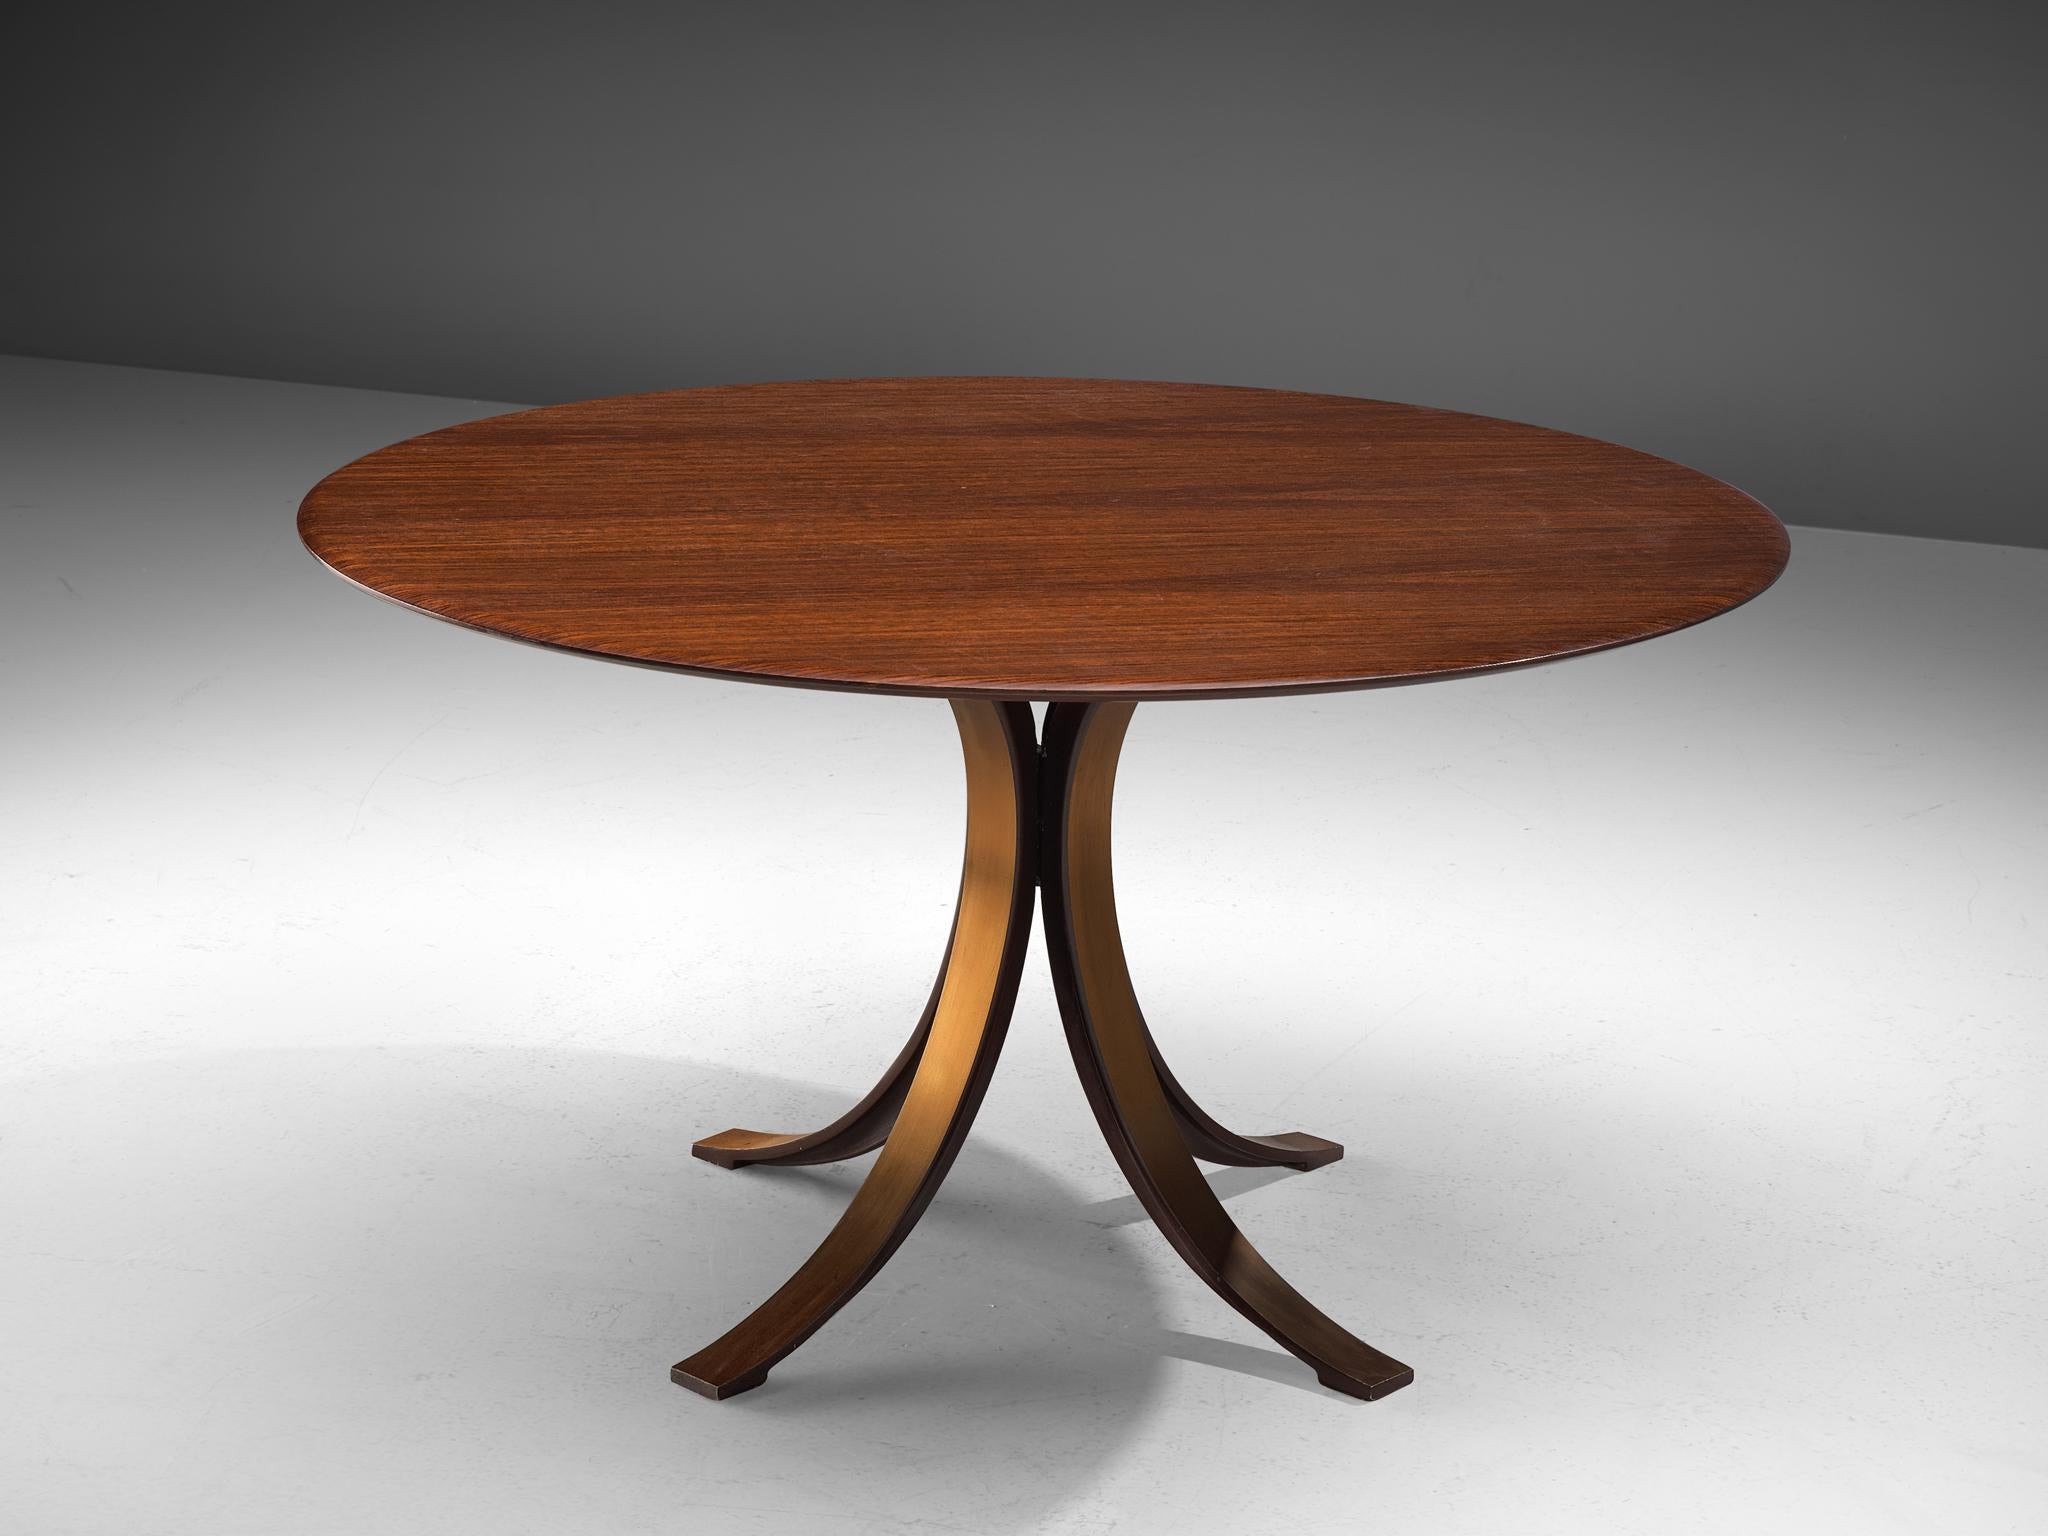 Osvaldo Borsani and Eugenio Gerli for Tecno, T-69 dining table, rosewood and metal, Italy, 1965.

Round dining table with rosewood top and copper colored, metal base. Characteristic on this table is the base. Consisting of four C-shaped legs.